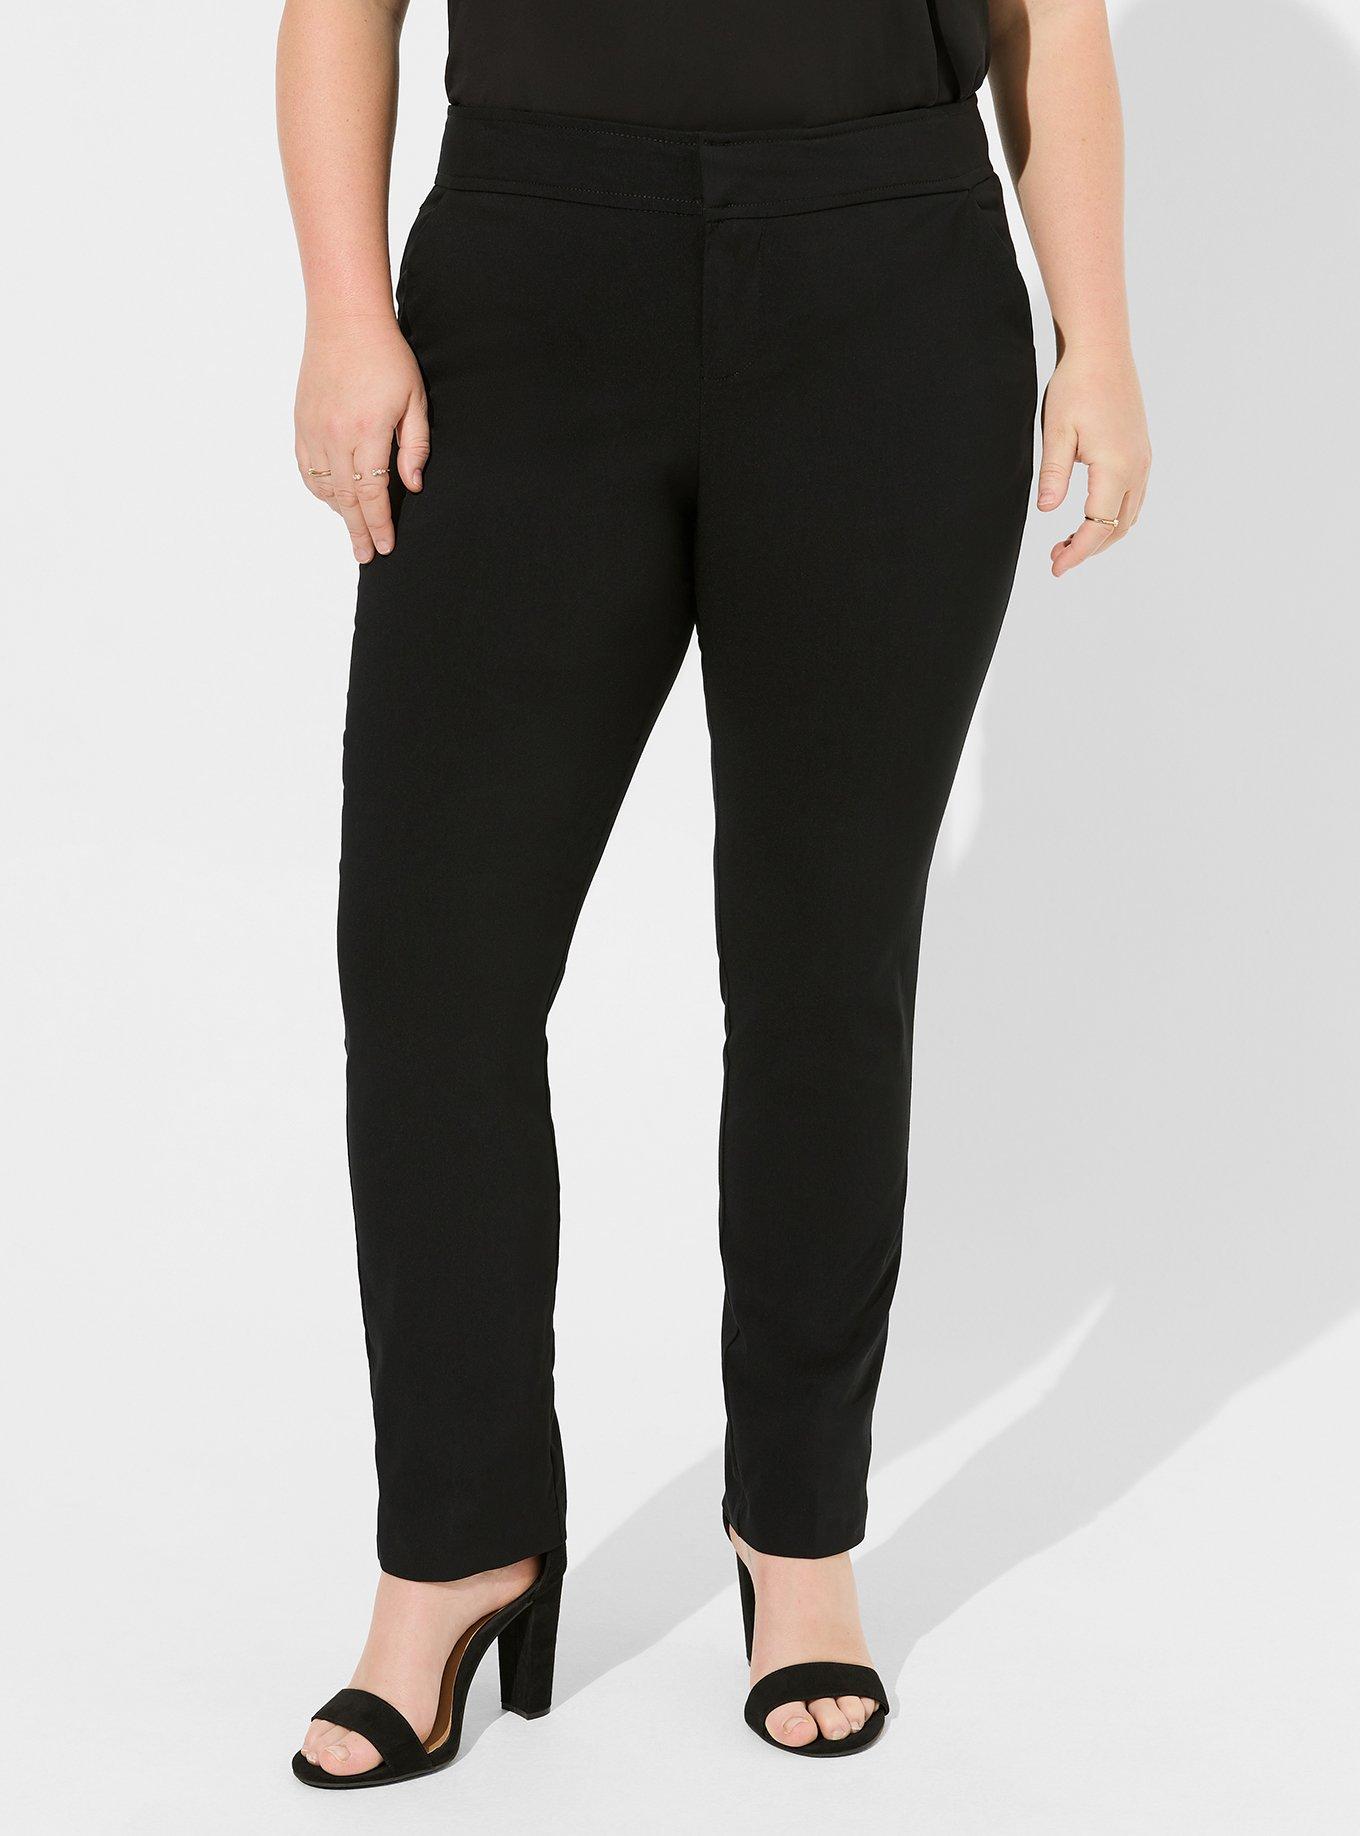 Plus Size - Trouser Relaxed Boot Millennial Stretch High-Rise Pant - Torrid